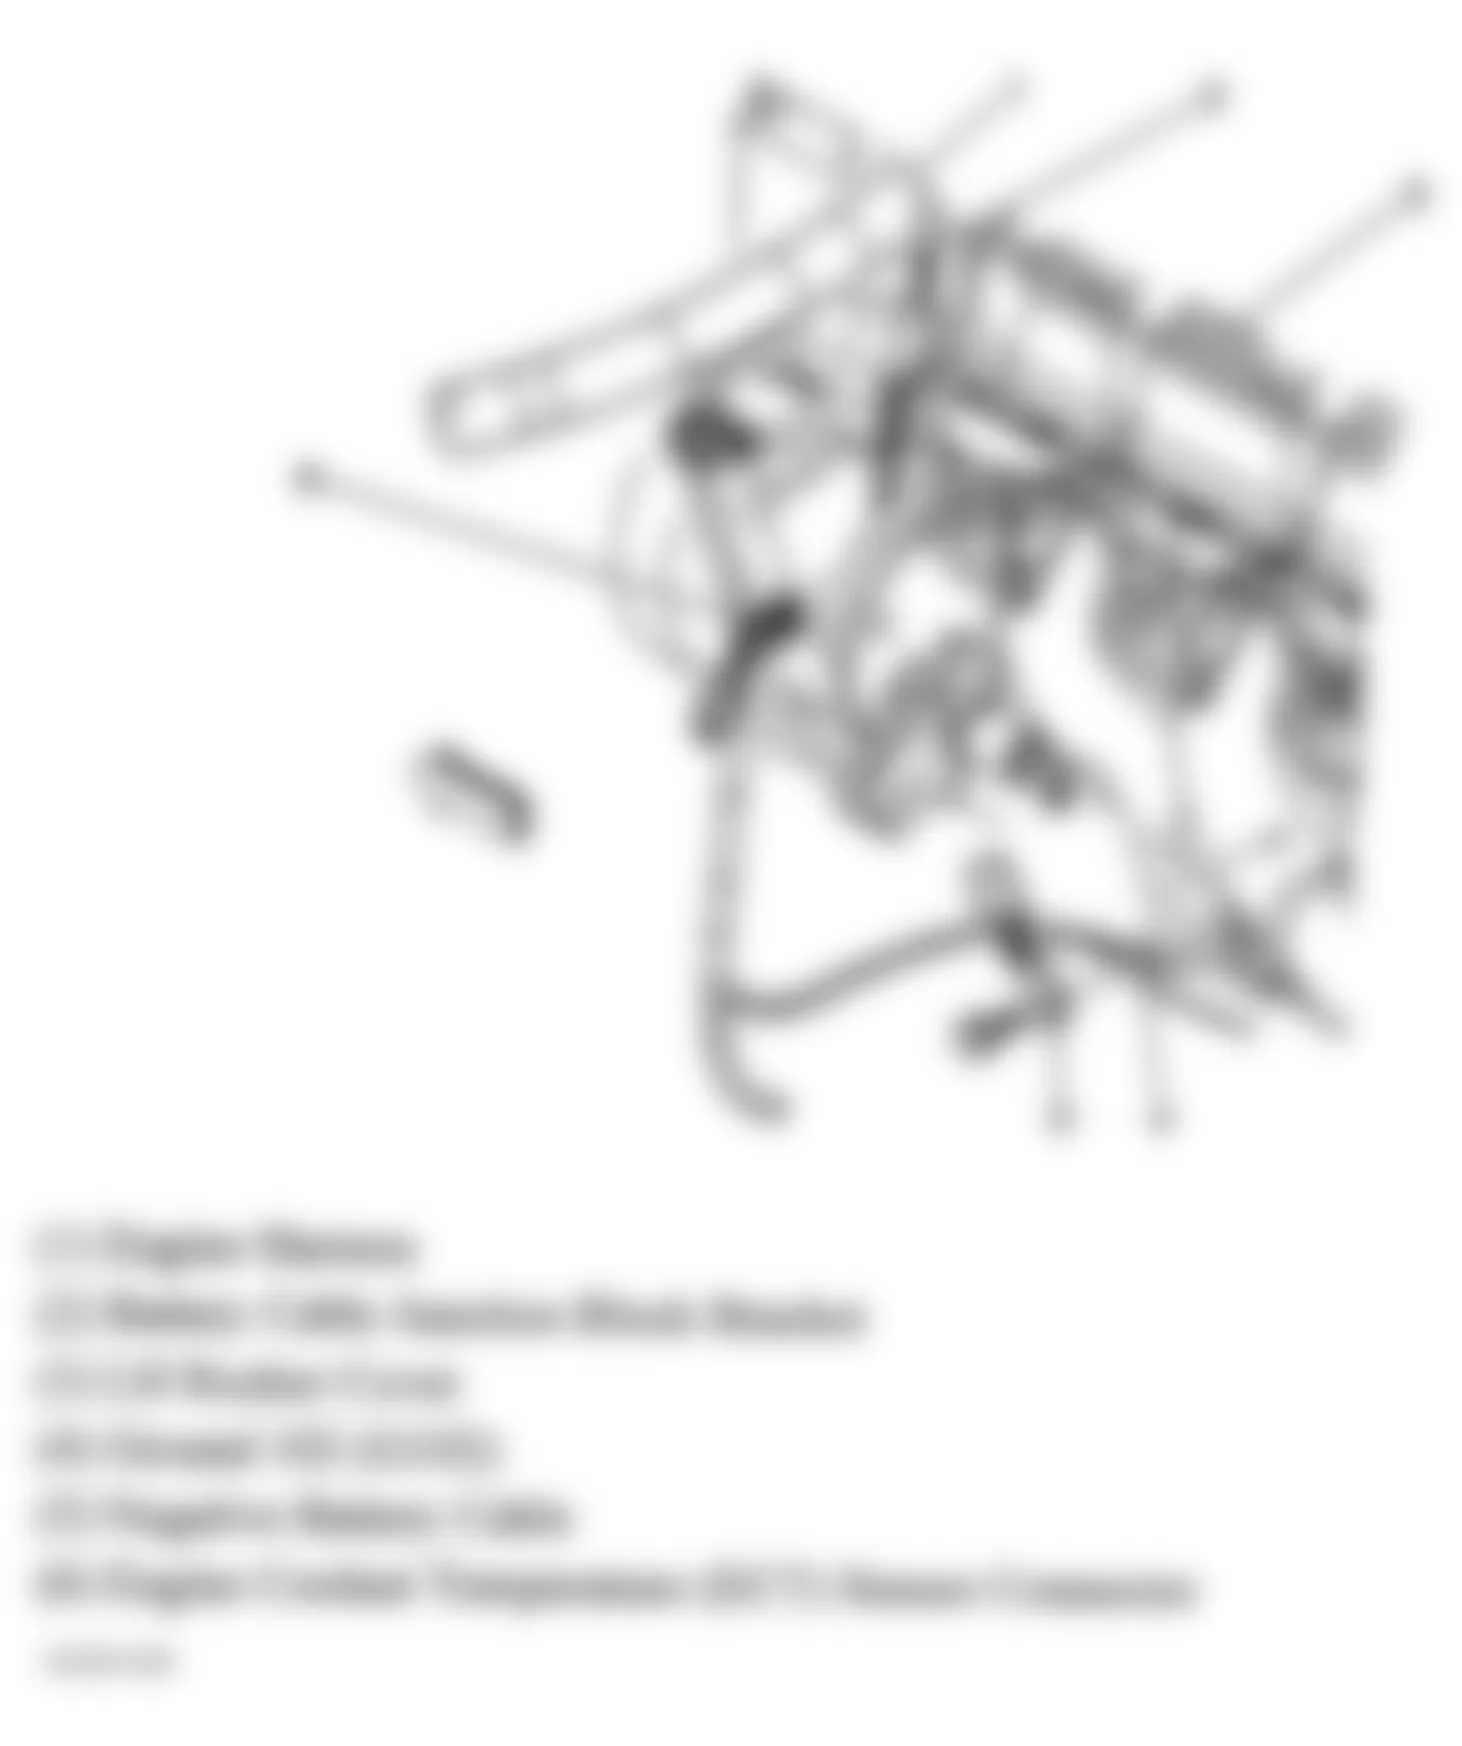 Chevrolet Avalanche 2500 2004 - Component Locations -  Lower Left Rear Of Engine (4.8L, 5.3L & 6.0L)